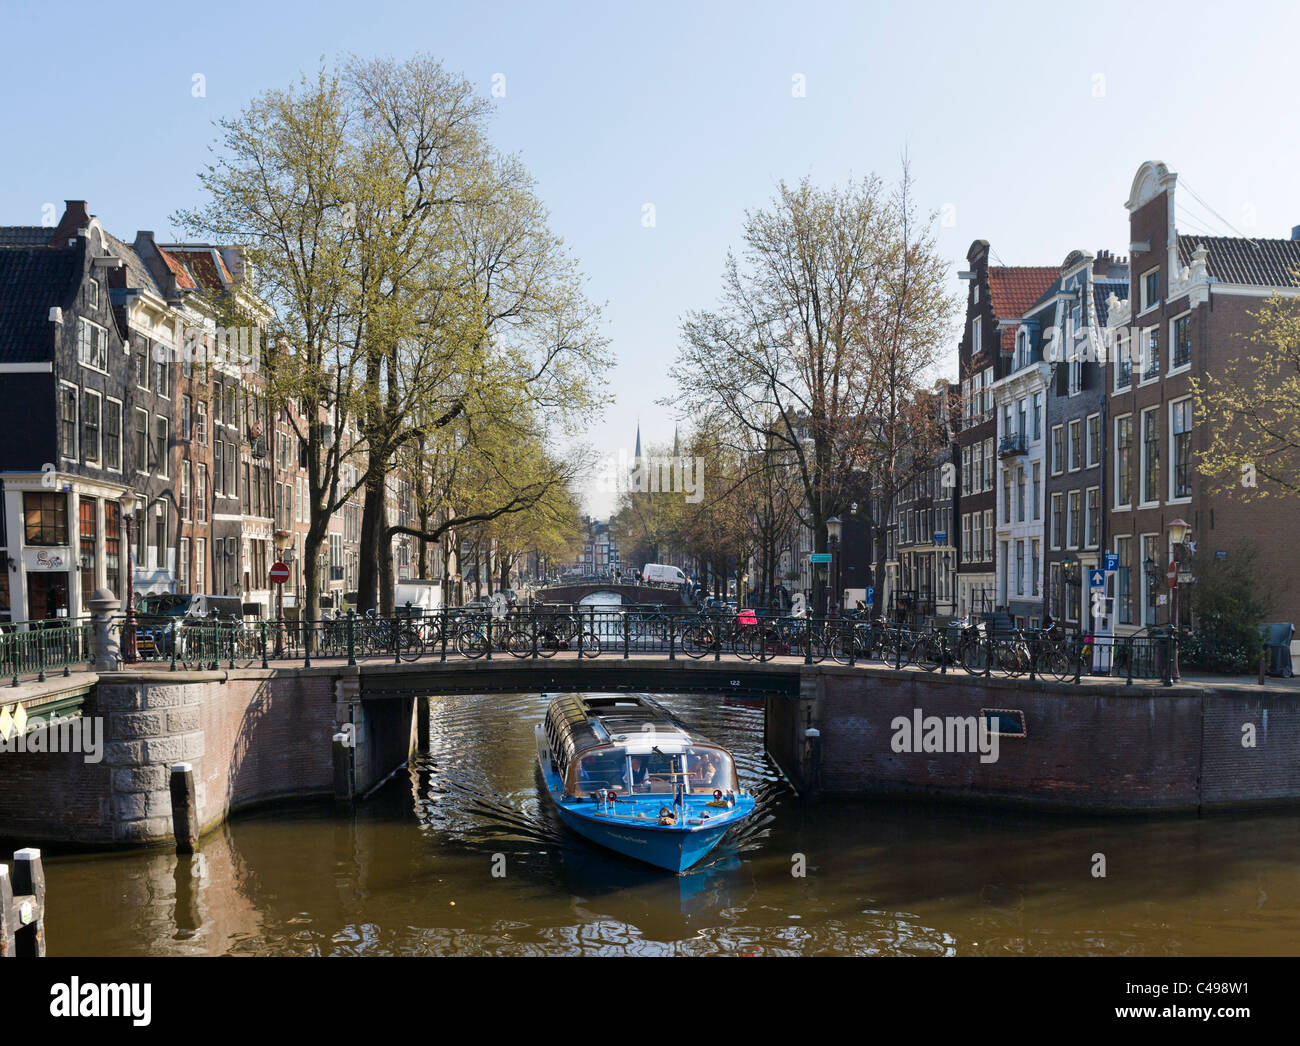 Sightseeing cruise on the Leidsegracht canal near the crossing with the Prinsengracht, Grachtengordel, Amsterdam, Netherlands Stock Photo